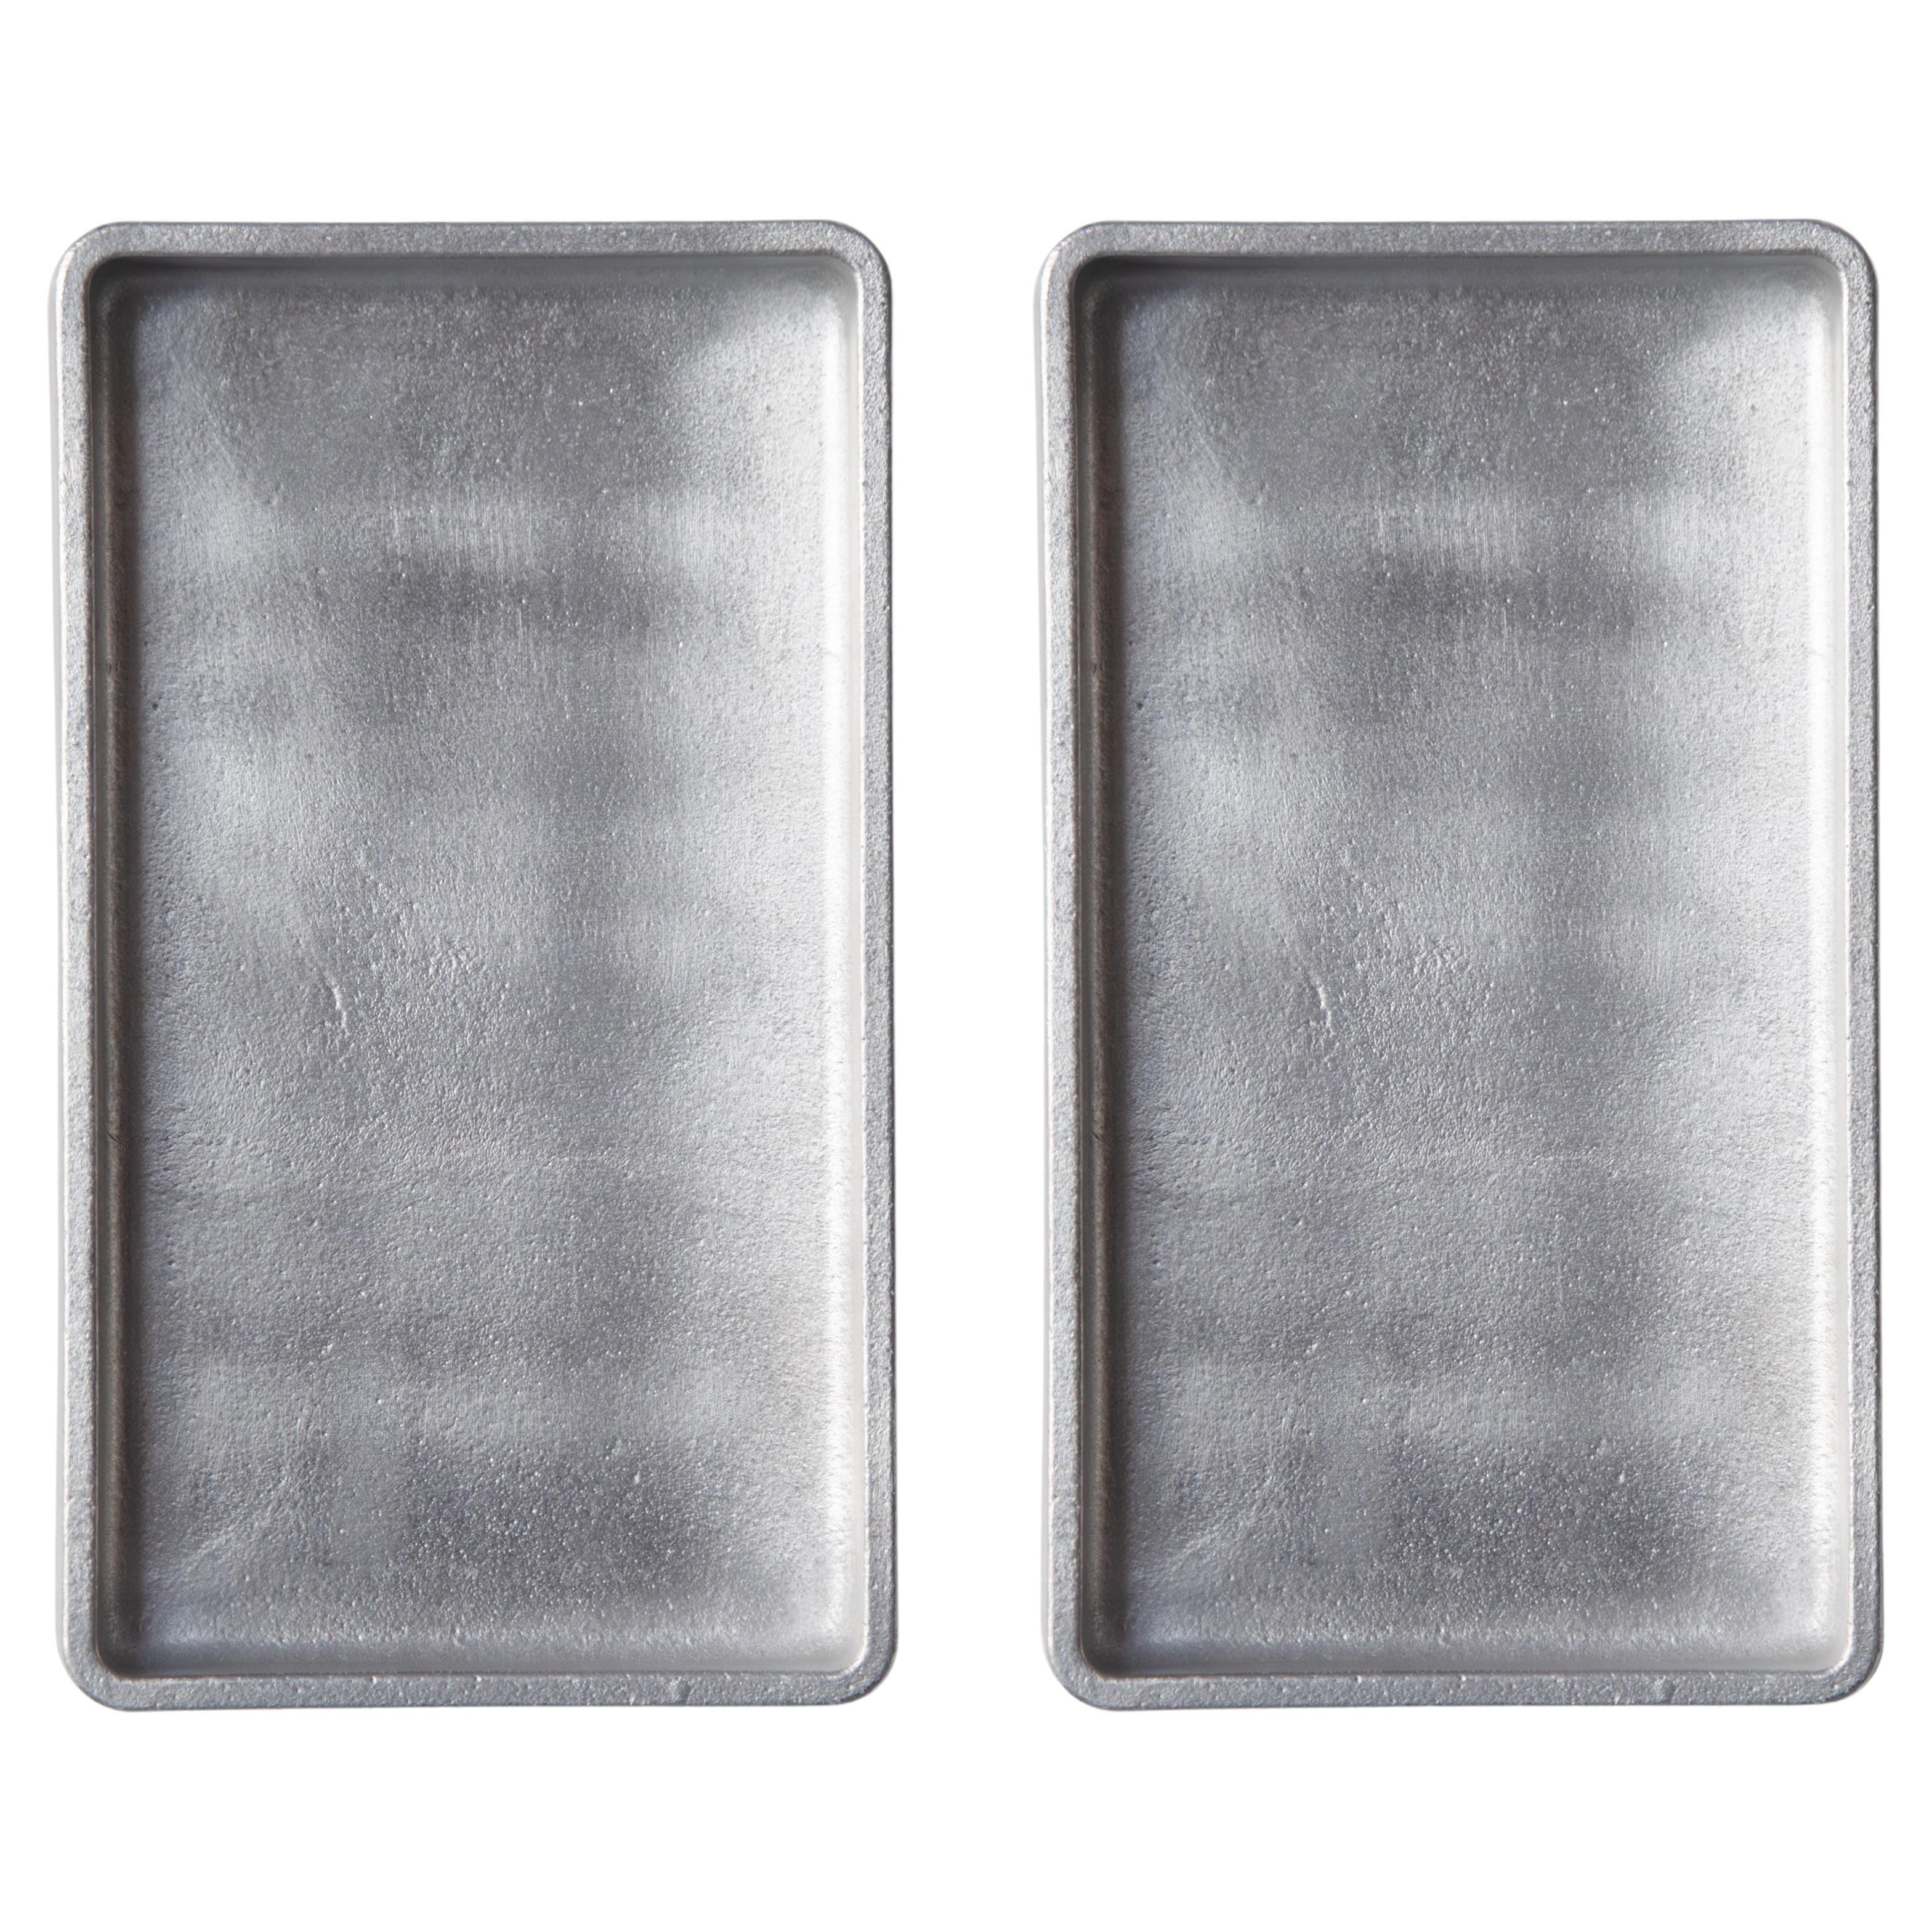 Set of 2 Aluminum Plato Table Trays by Stem Design For Sale